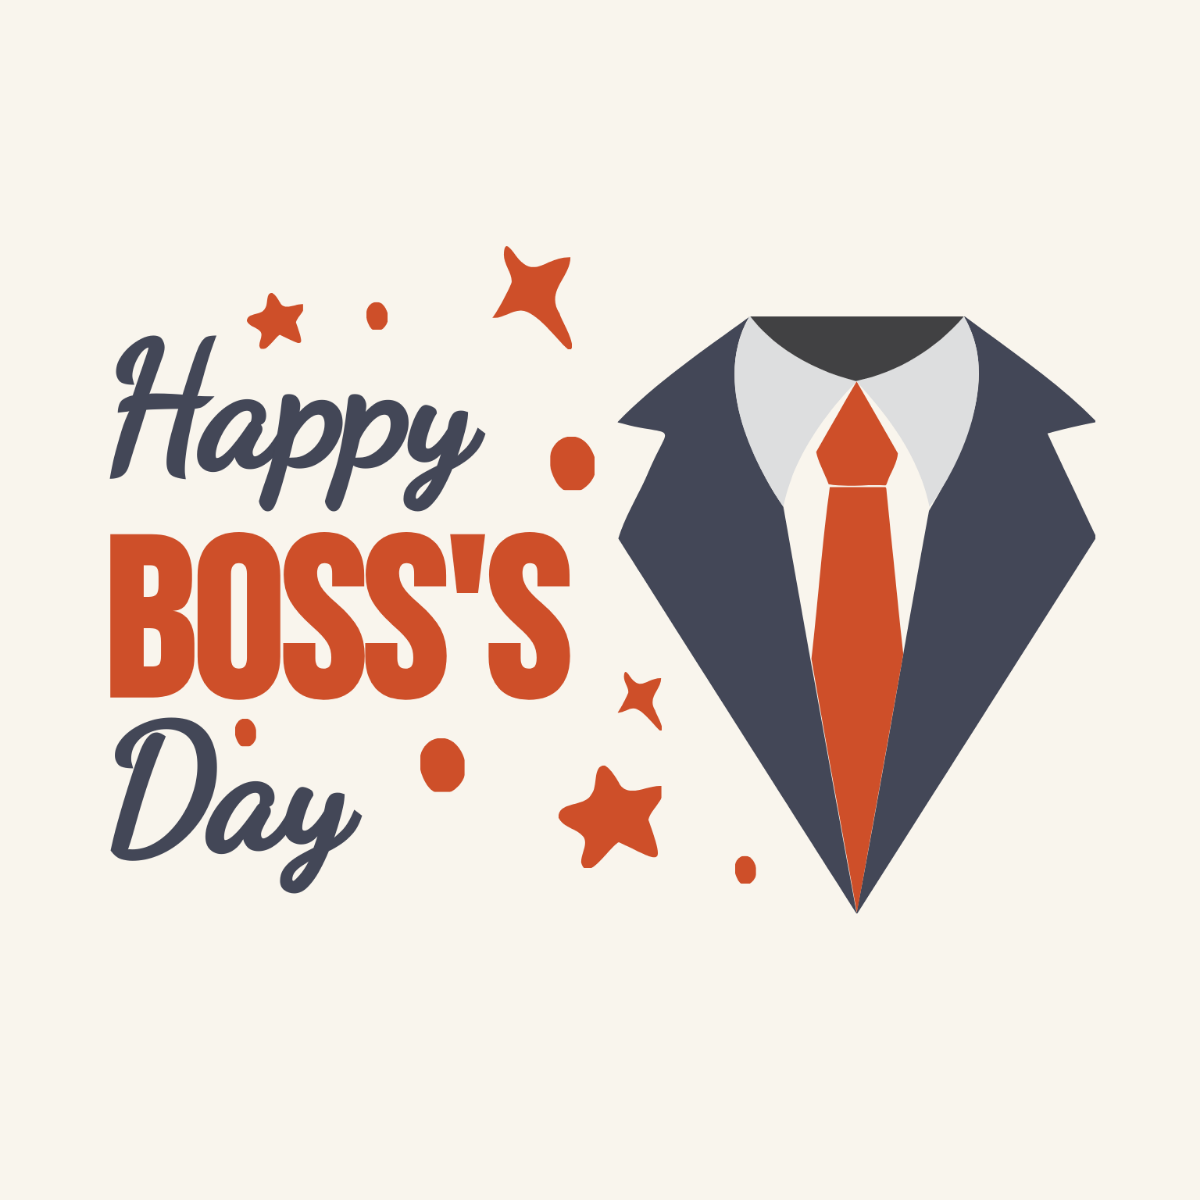 FREE Boss' Day Templates & Examples - Edit Online & Download | Template.net